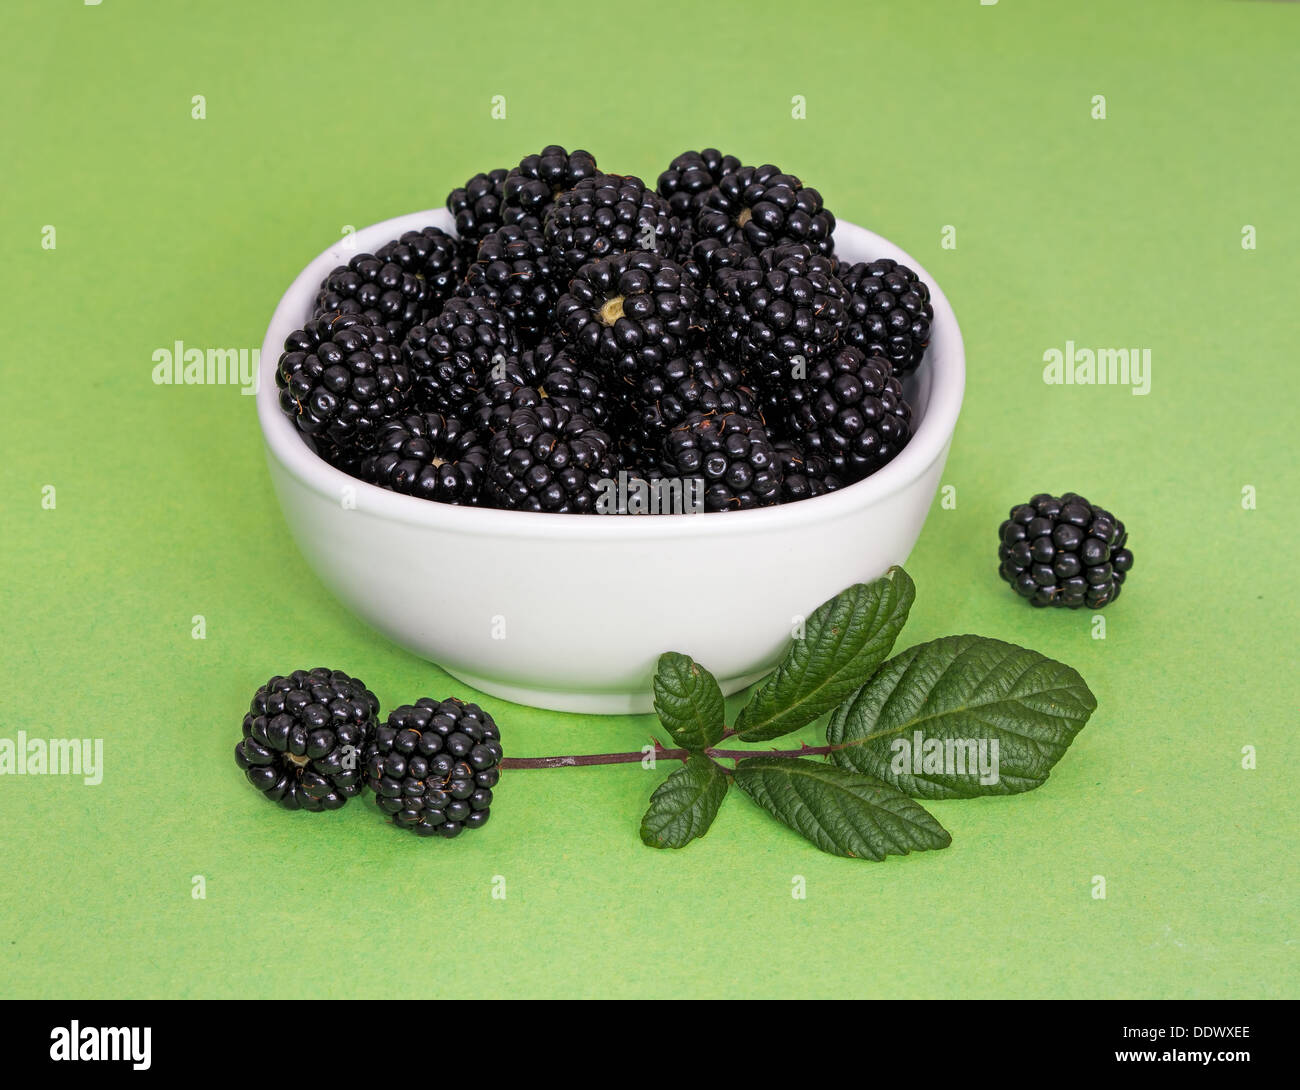 Fresh picked uncultivated berries - free food Stock Photo